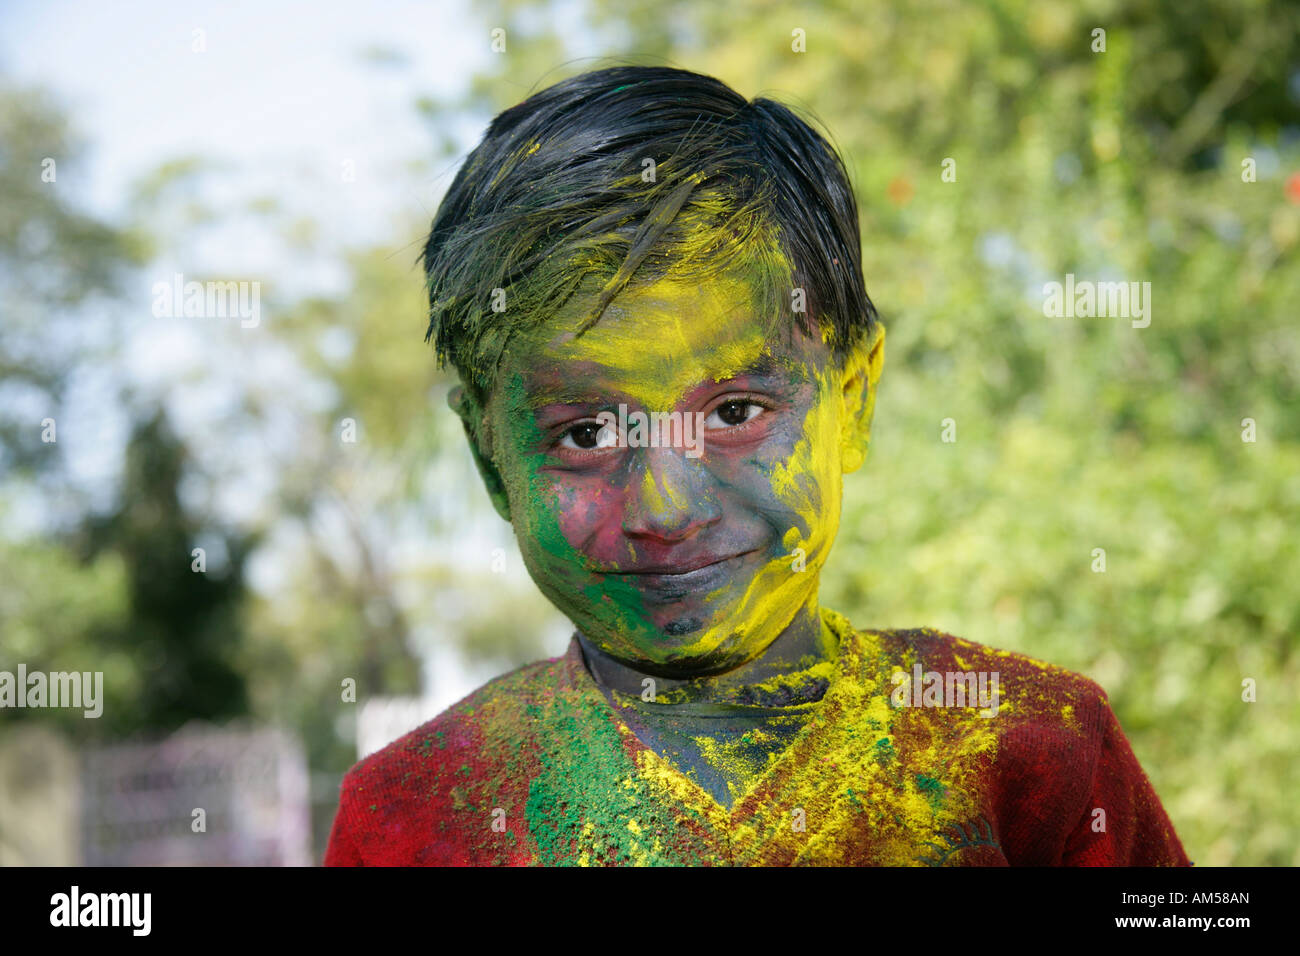 A smiling young boy shows off his colored face during festival of Holi in India. Stock Photo